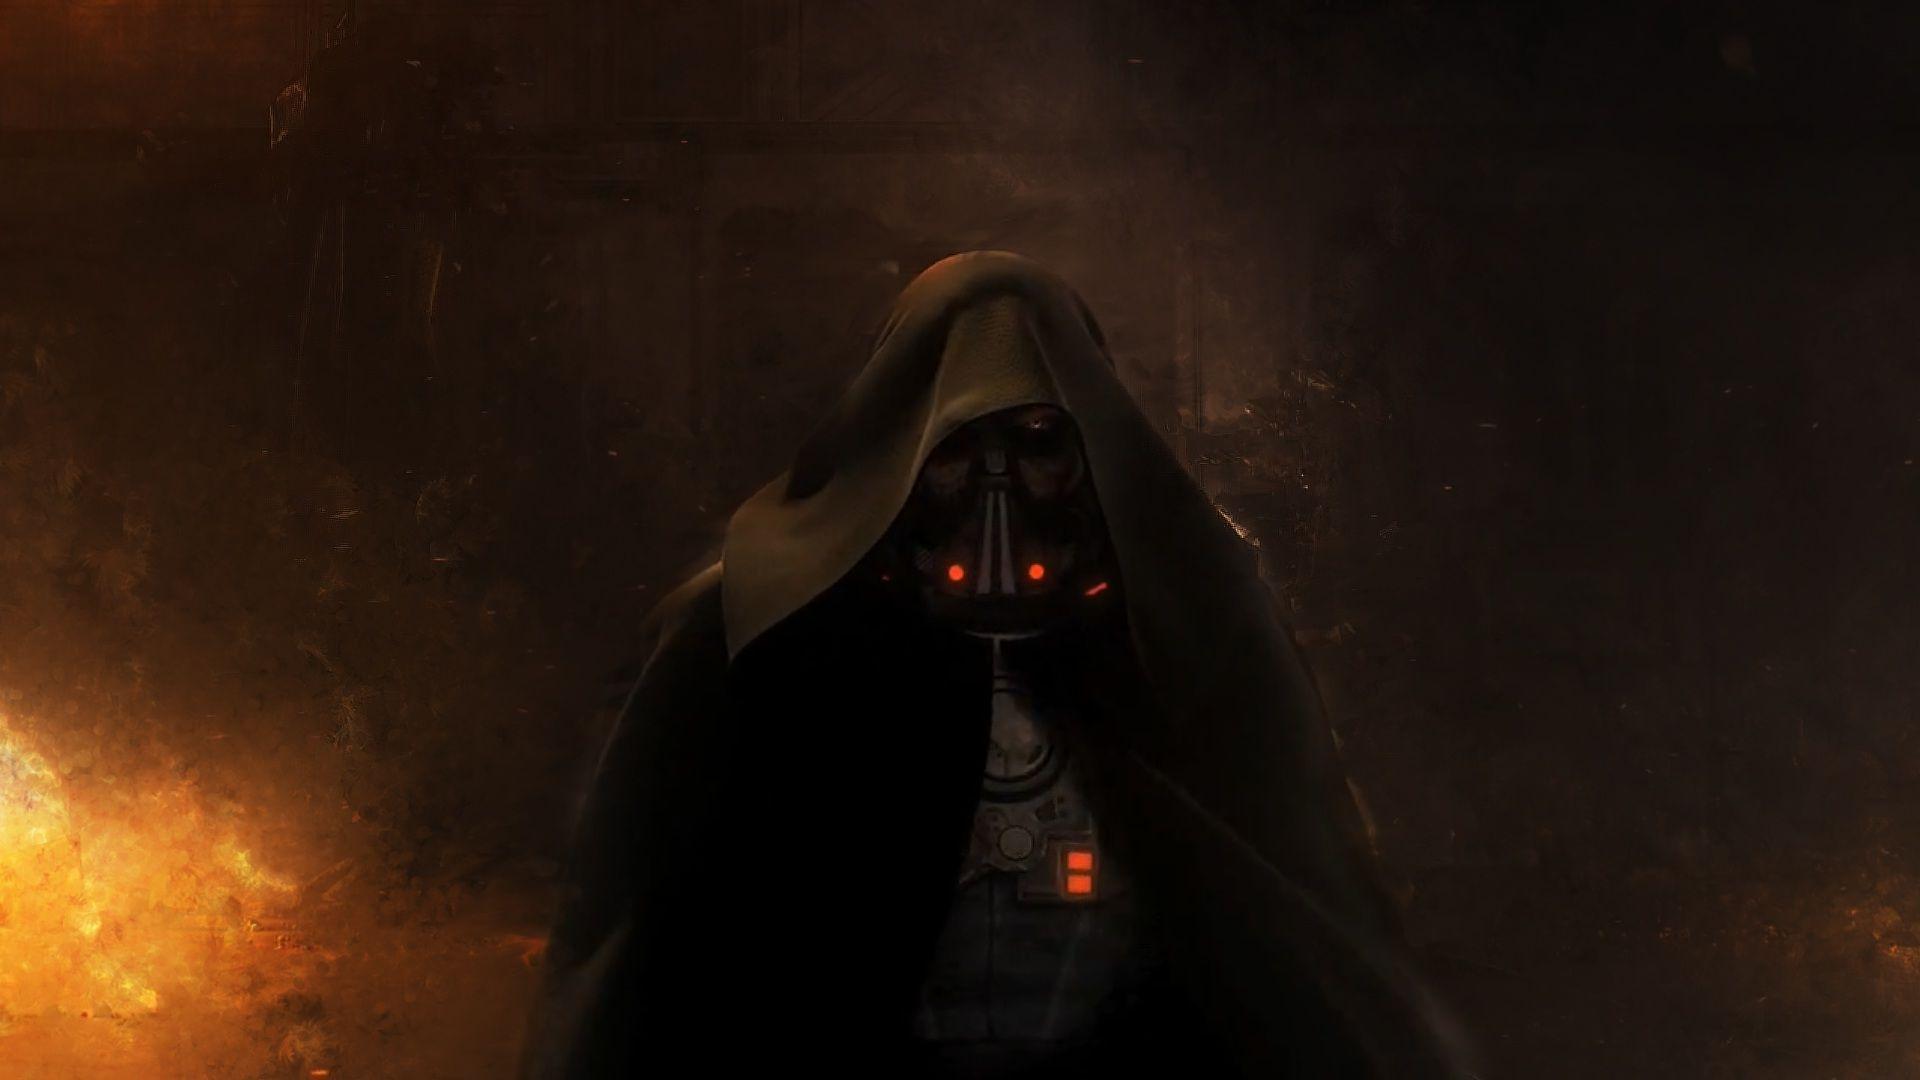 Free download Pics Photo Star Wars Sith Wallpaper [1920x1080] for your Desktop, Mobile & Tablet. Explore Sith Wallpaper. Star Wars Wallpaper 1080p, Star Wars Sith Wallpaper, Best Sith Wallpaper